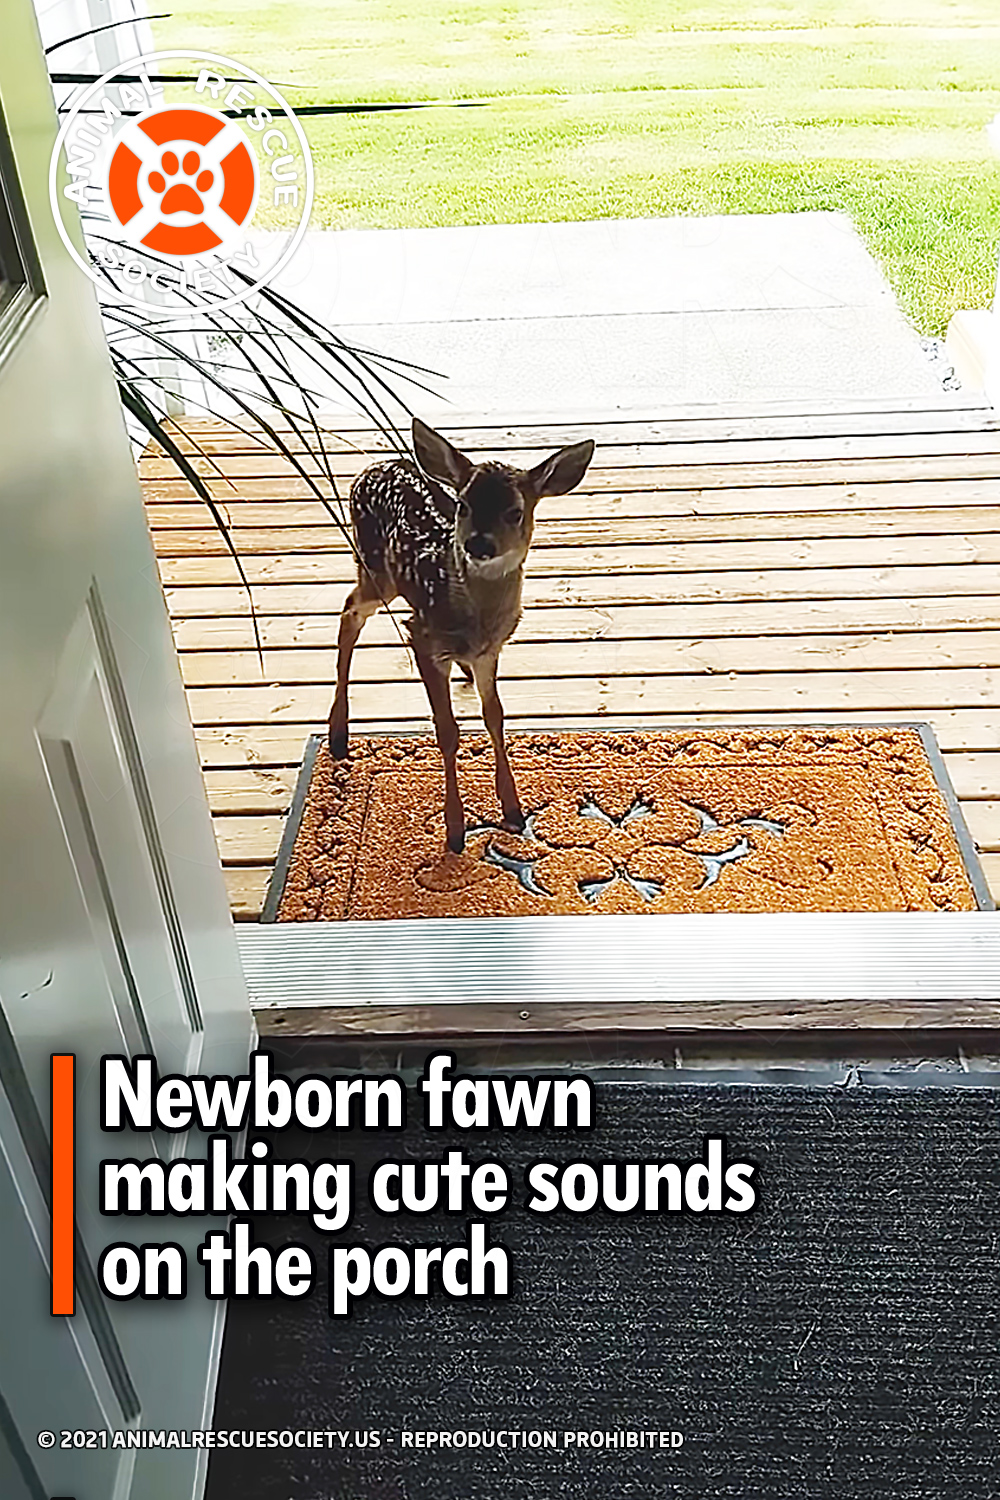 Newborn fawn making cute sounds on the porch